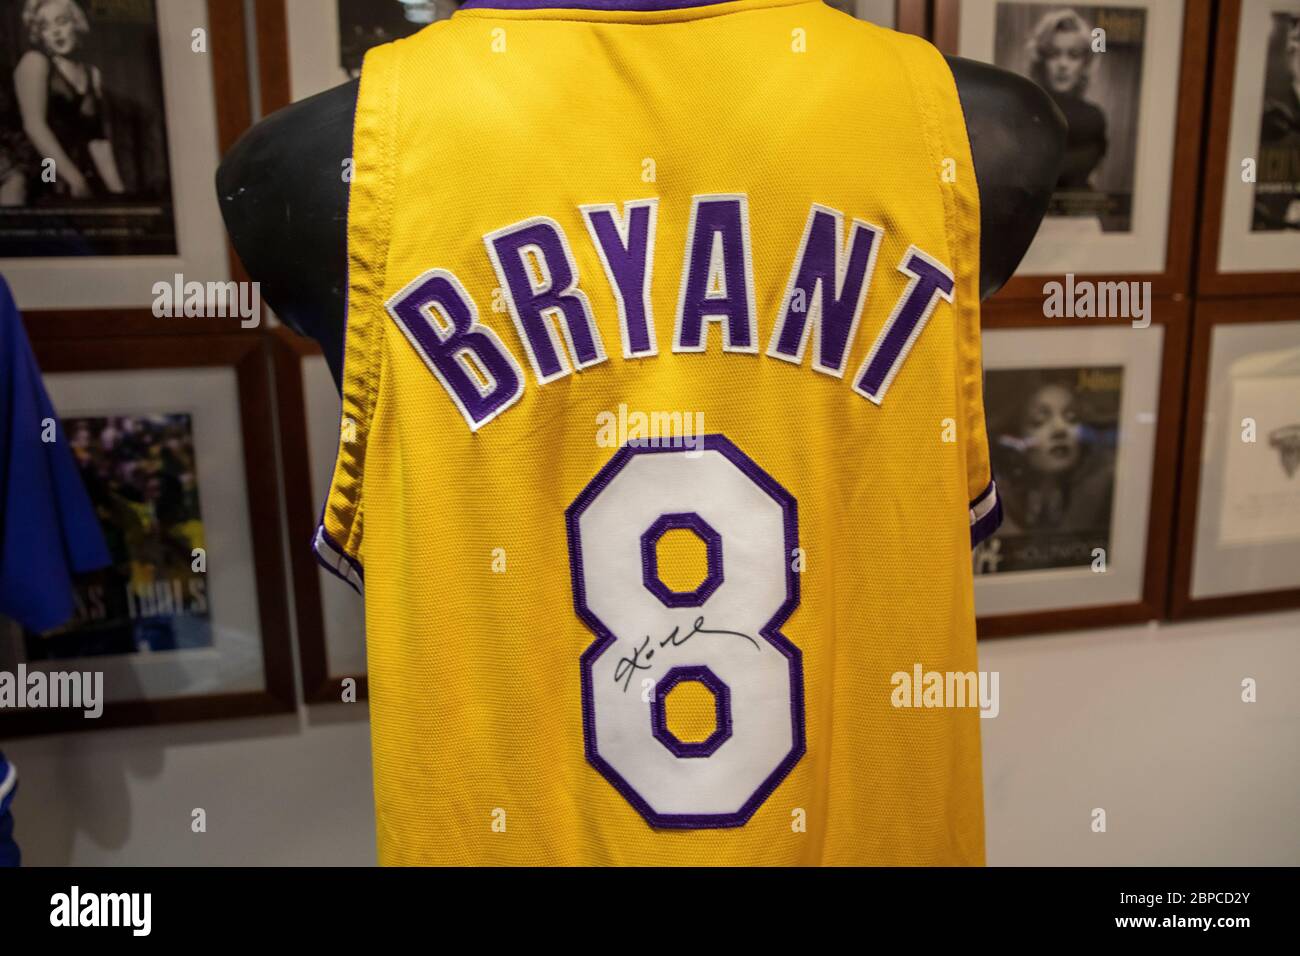 Kobe bryant 2000 hi-res stock photography and images - Alamy